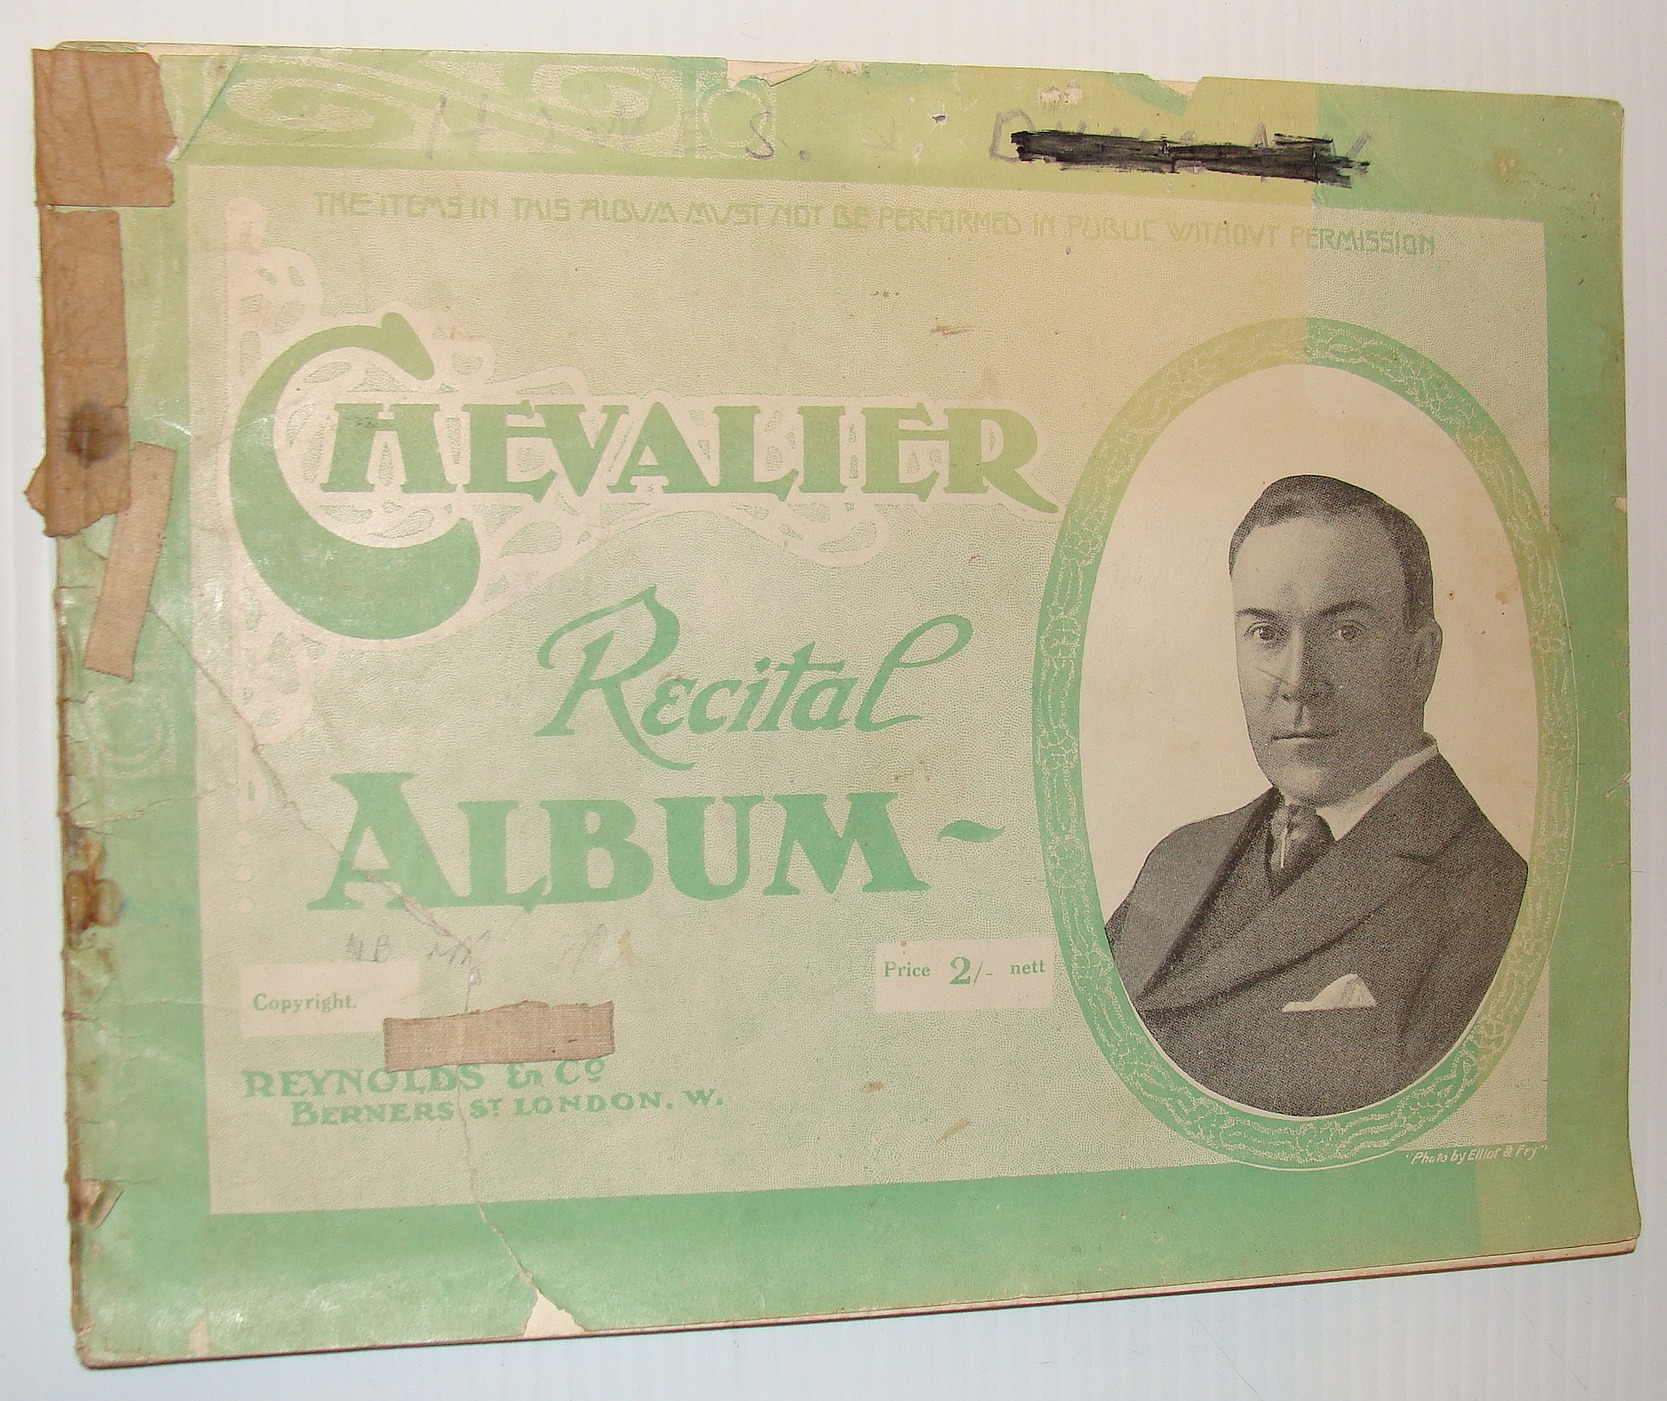 CHEVALIER, ALBERT; WEST, ALFRED H.; - Chevalier Recital Album: Sheet Music for Voice and Piano Plus Photos